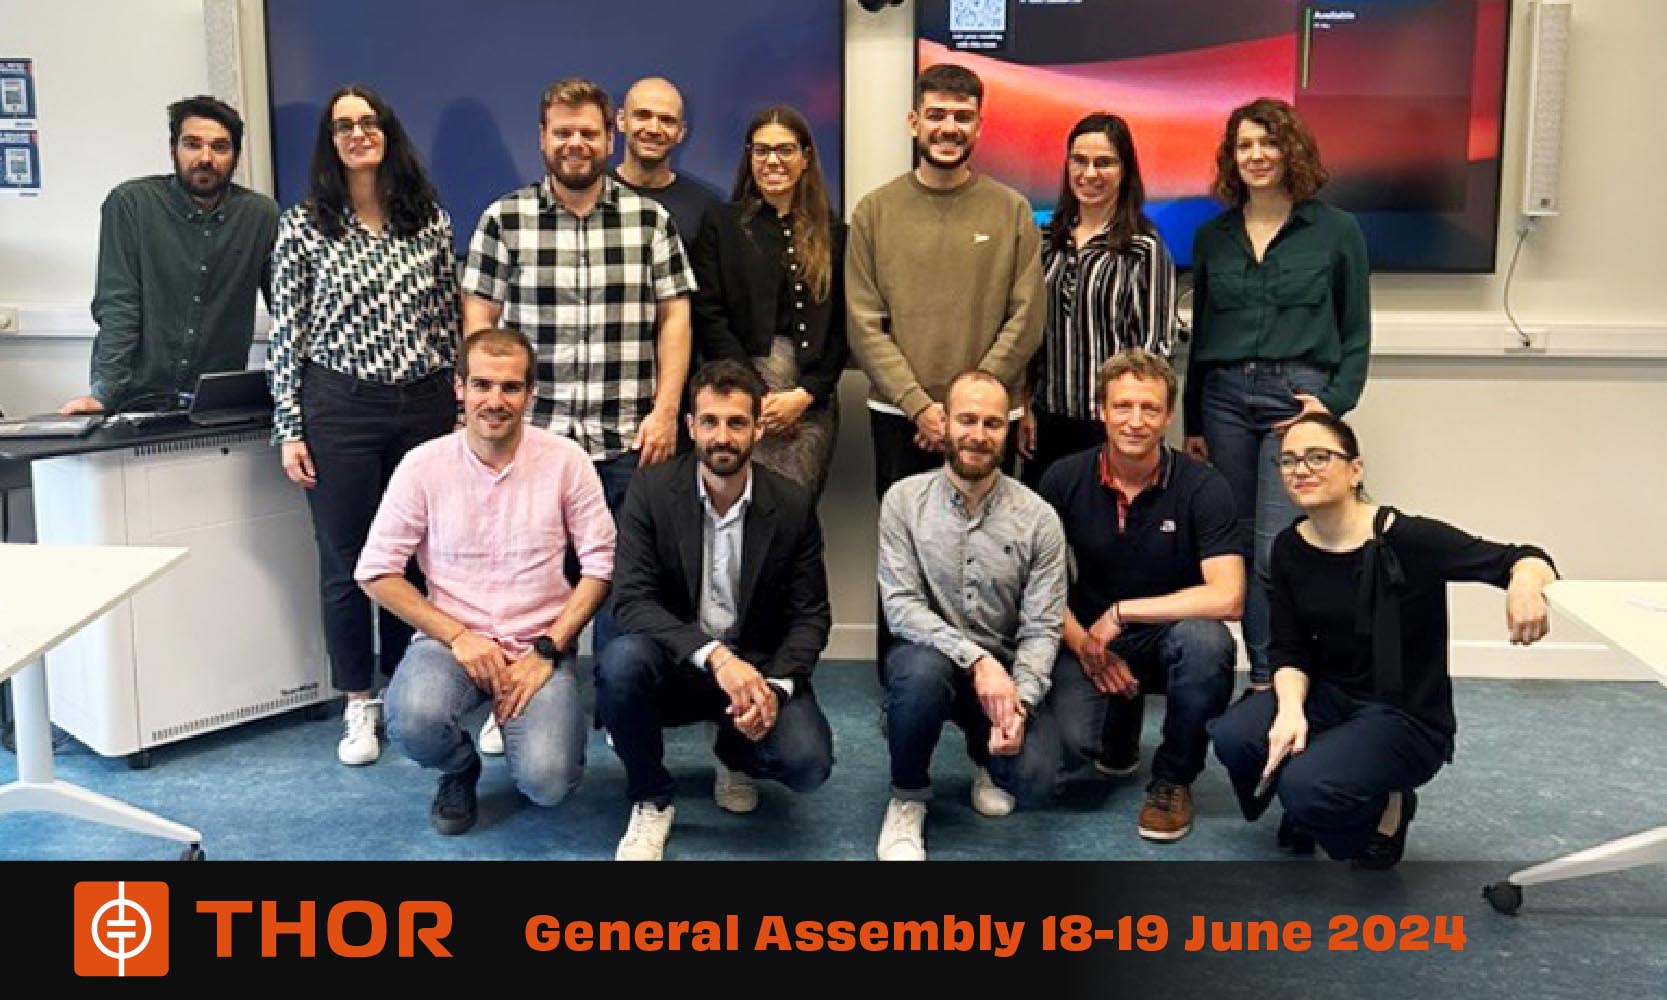 thor general assembly bruxelles 18 19 giugno 2024